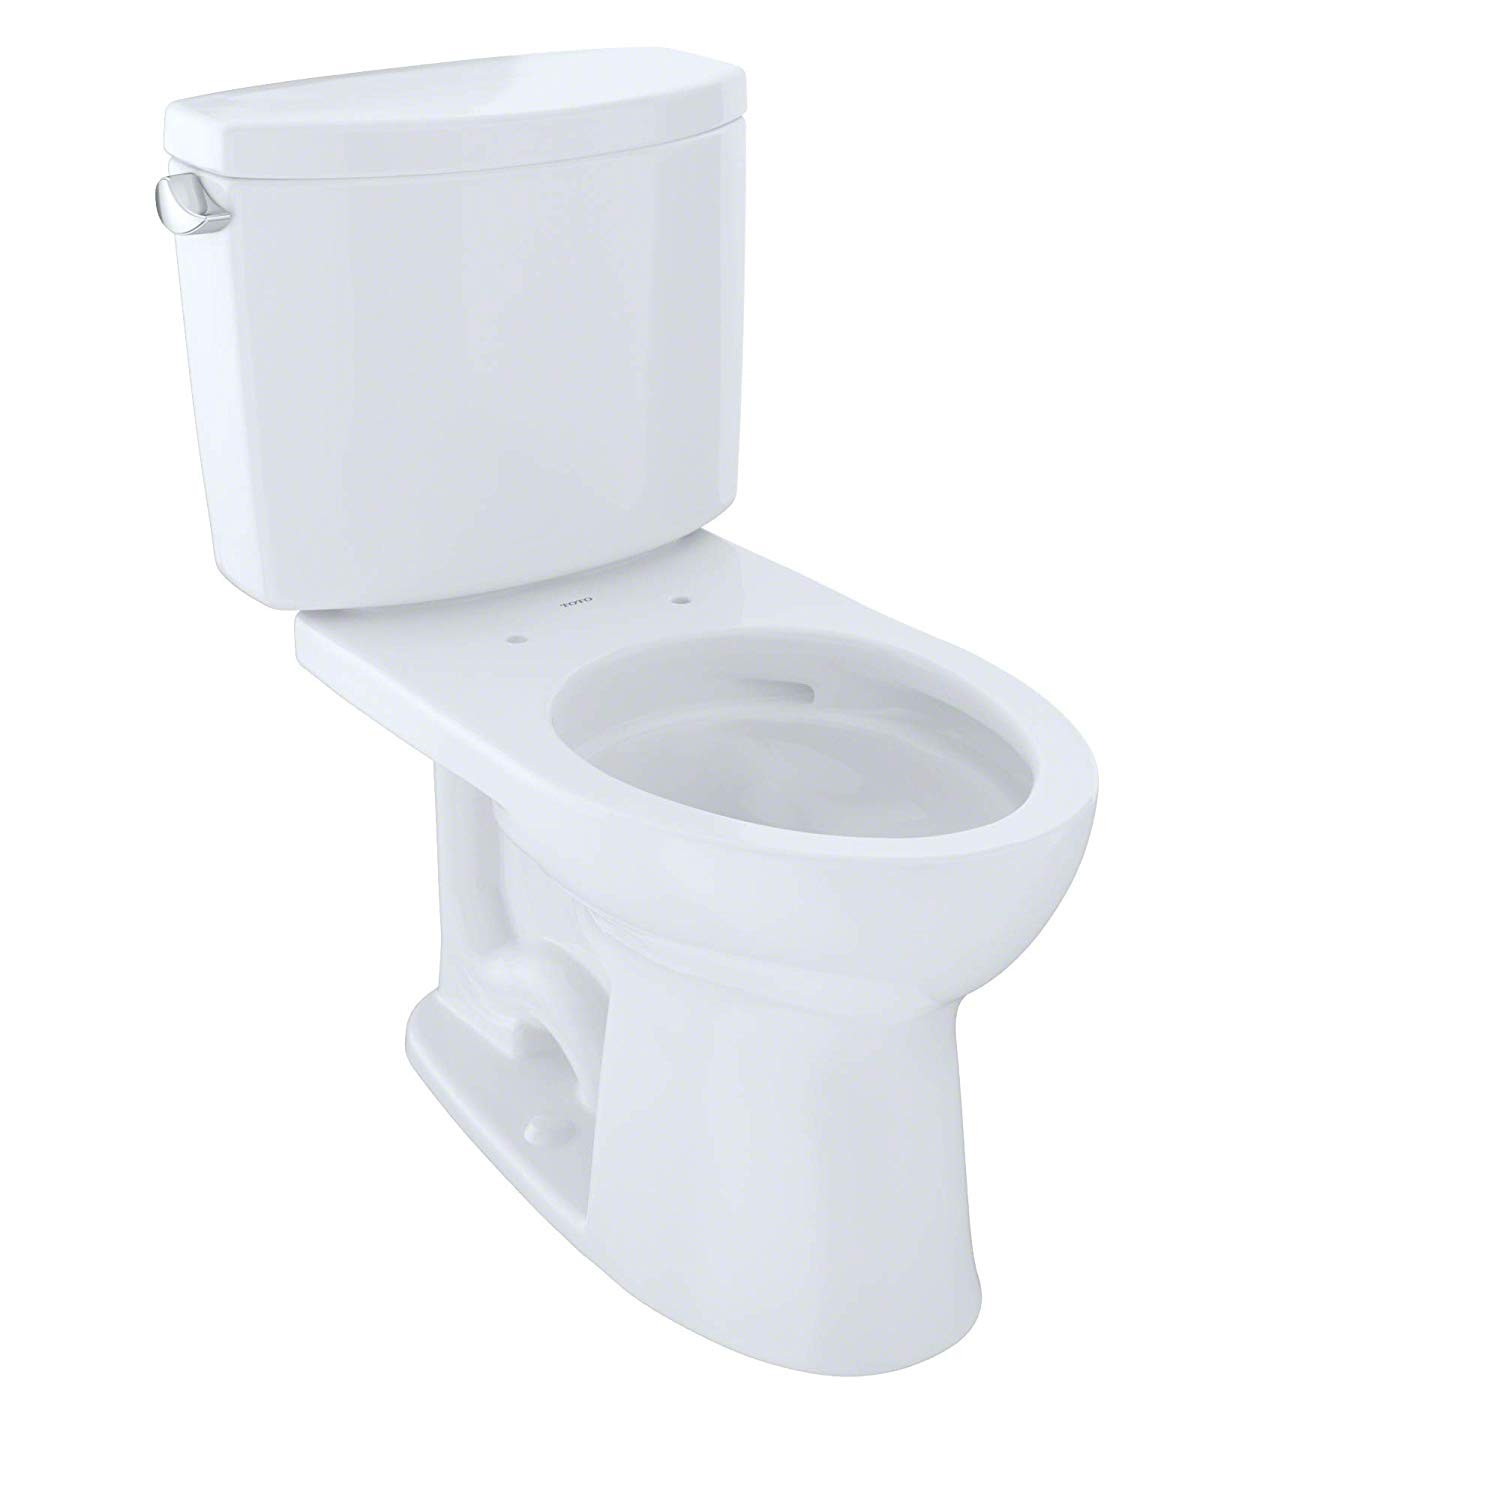 TOTO CST454CEFG DRAKE II TWO-PIECE TOILET, 1.28 GPF, ELONGATED BOWL WITH SANAGLOSS